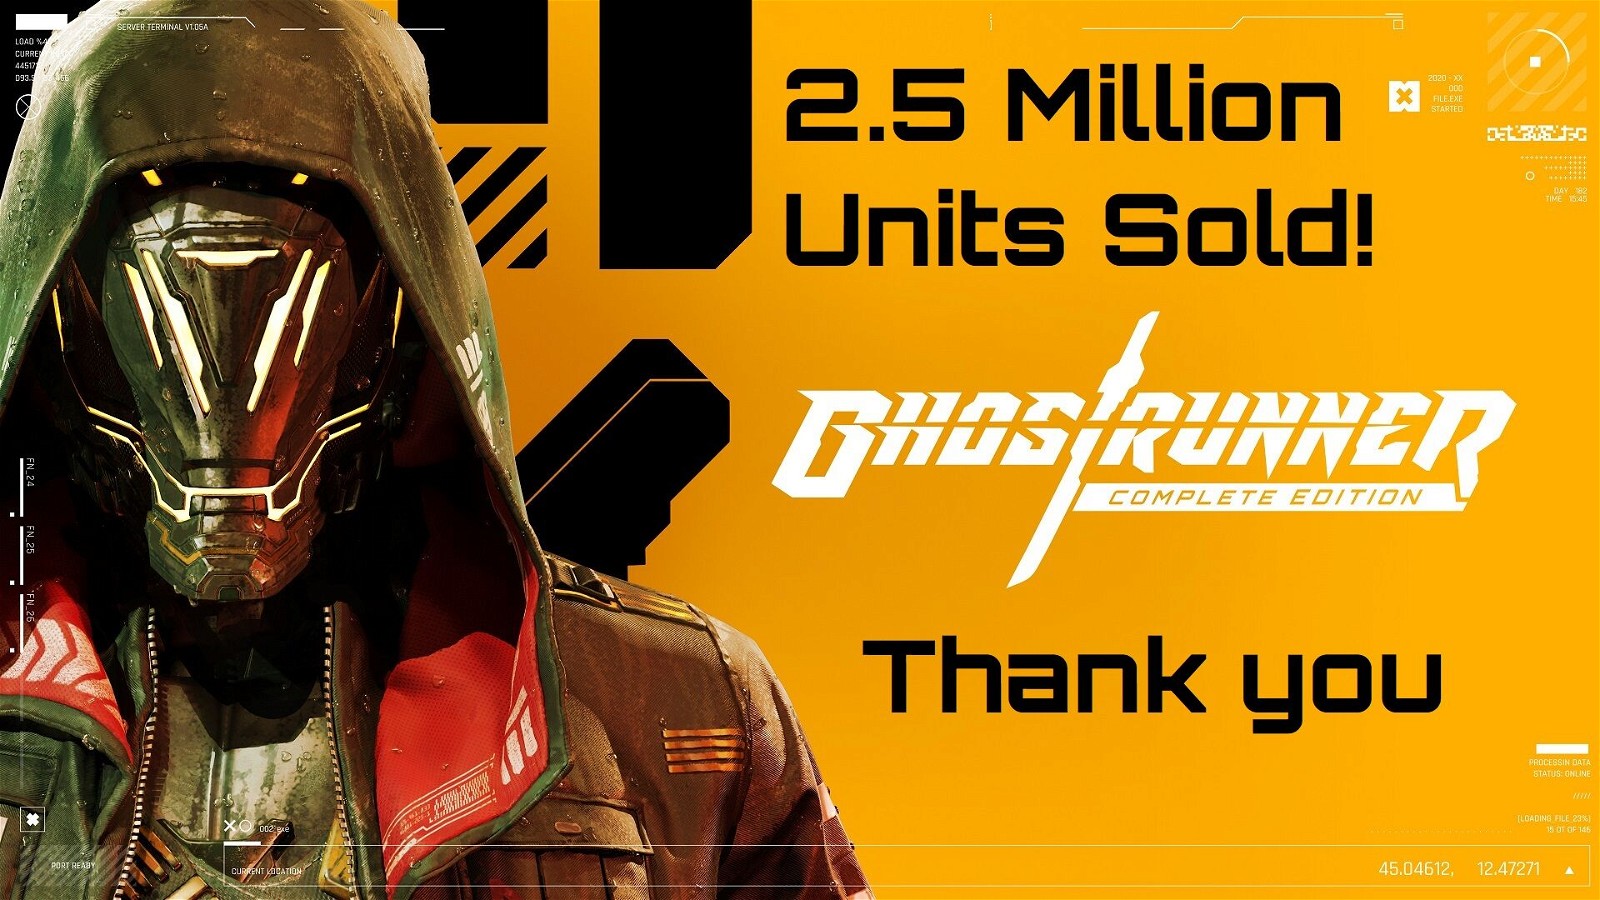 Ghostrunner has reached an amazing milestone, selling over 2.5 million copies since its launch in 2020.